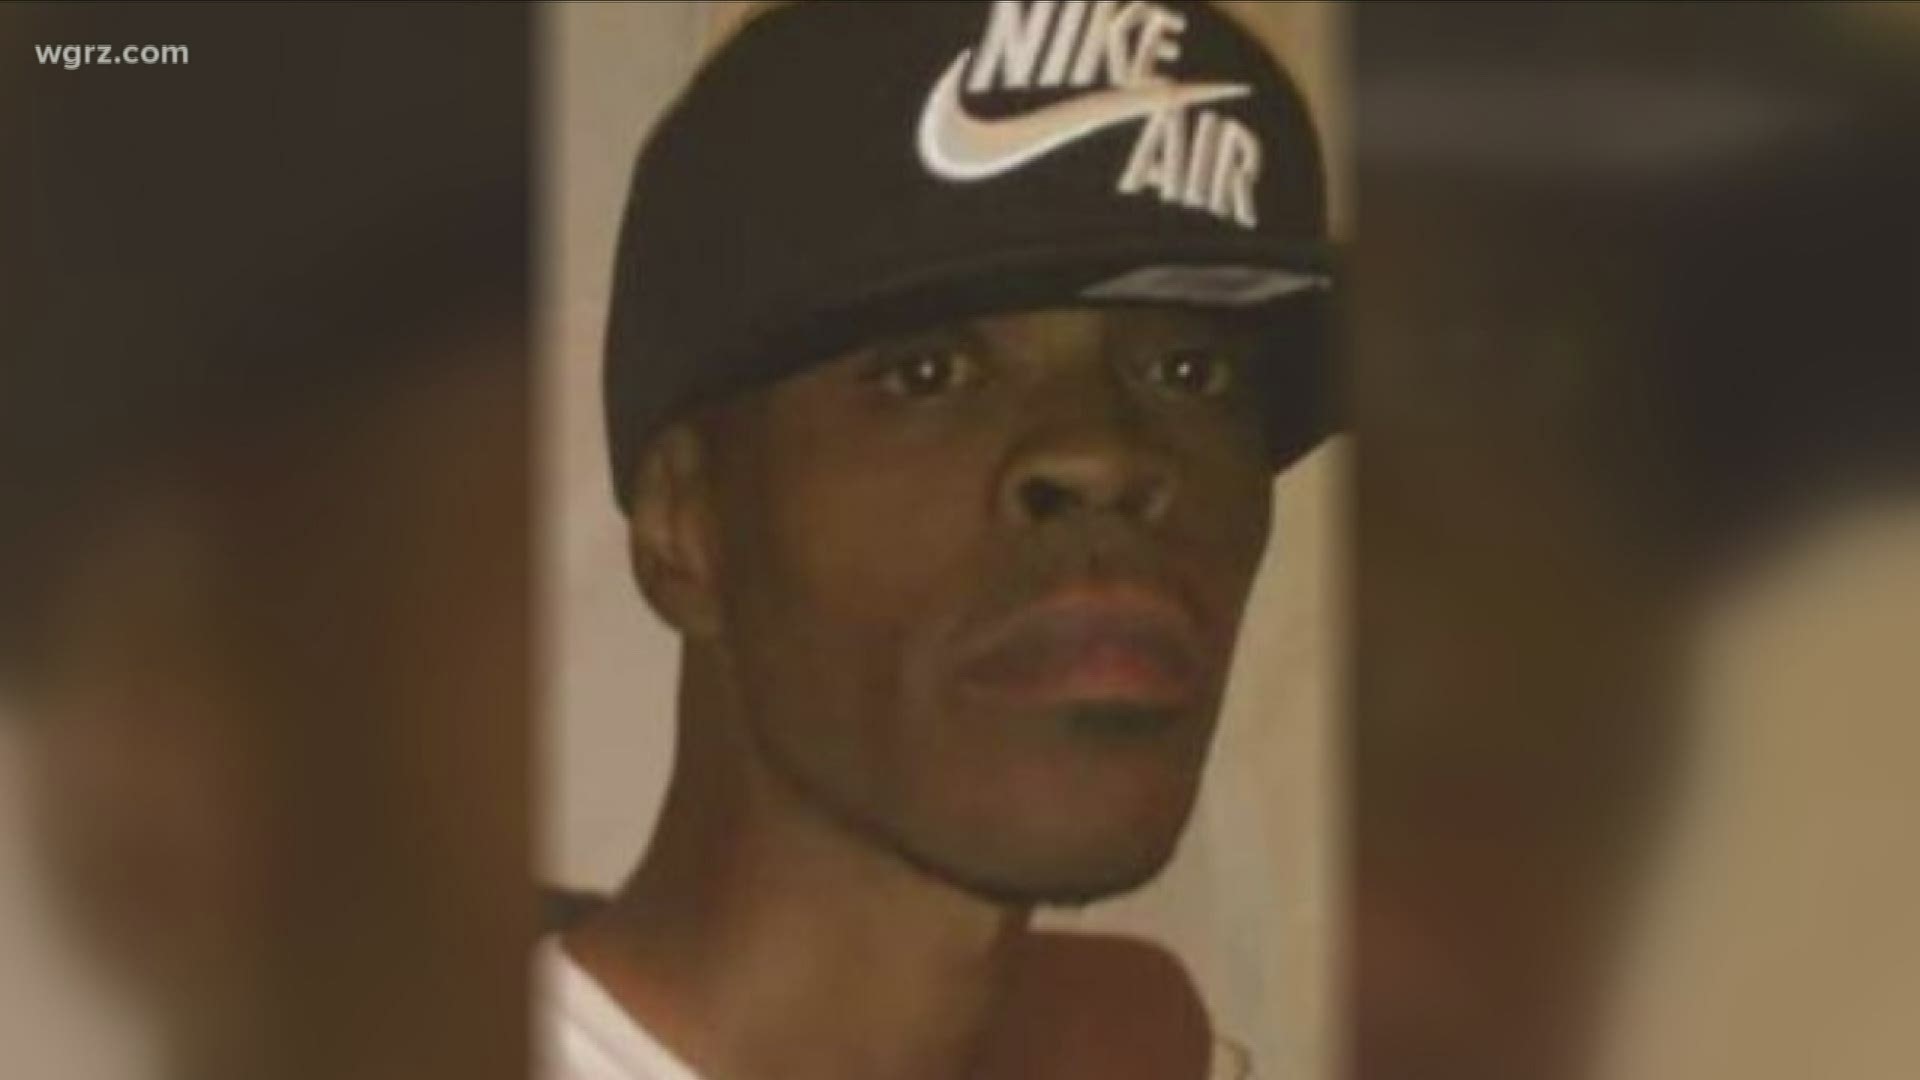 man's name was Connell Burrell.
His family wants to know why the 44-year old man died.